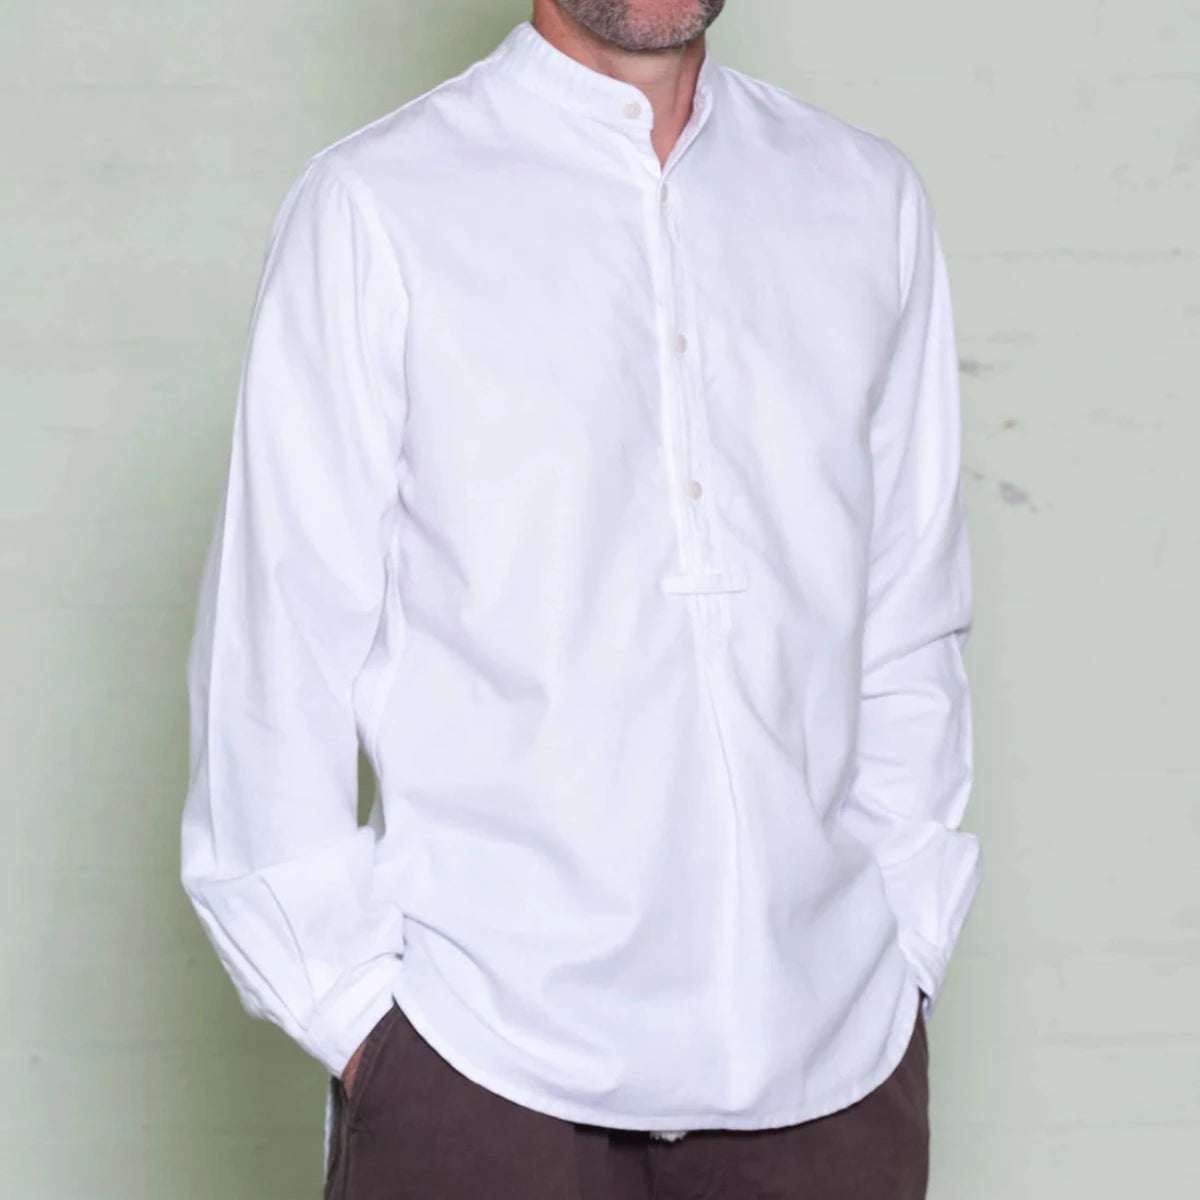 Yarmouth Oilskins - The Admiralty Shirt - Grandad Collar - Cotton - White L